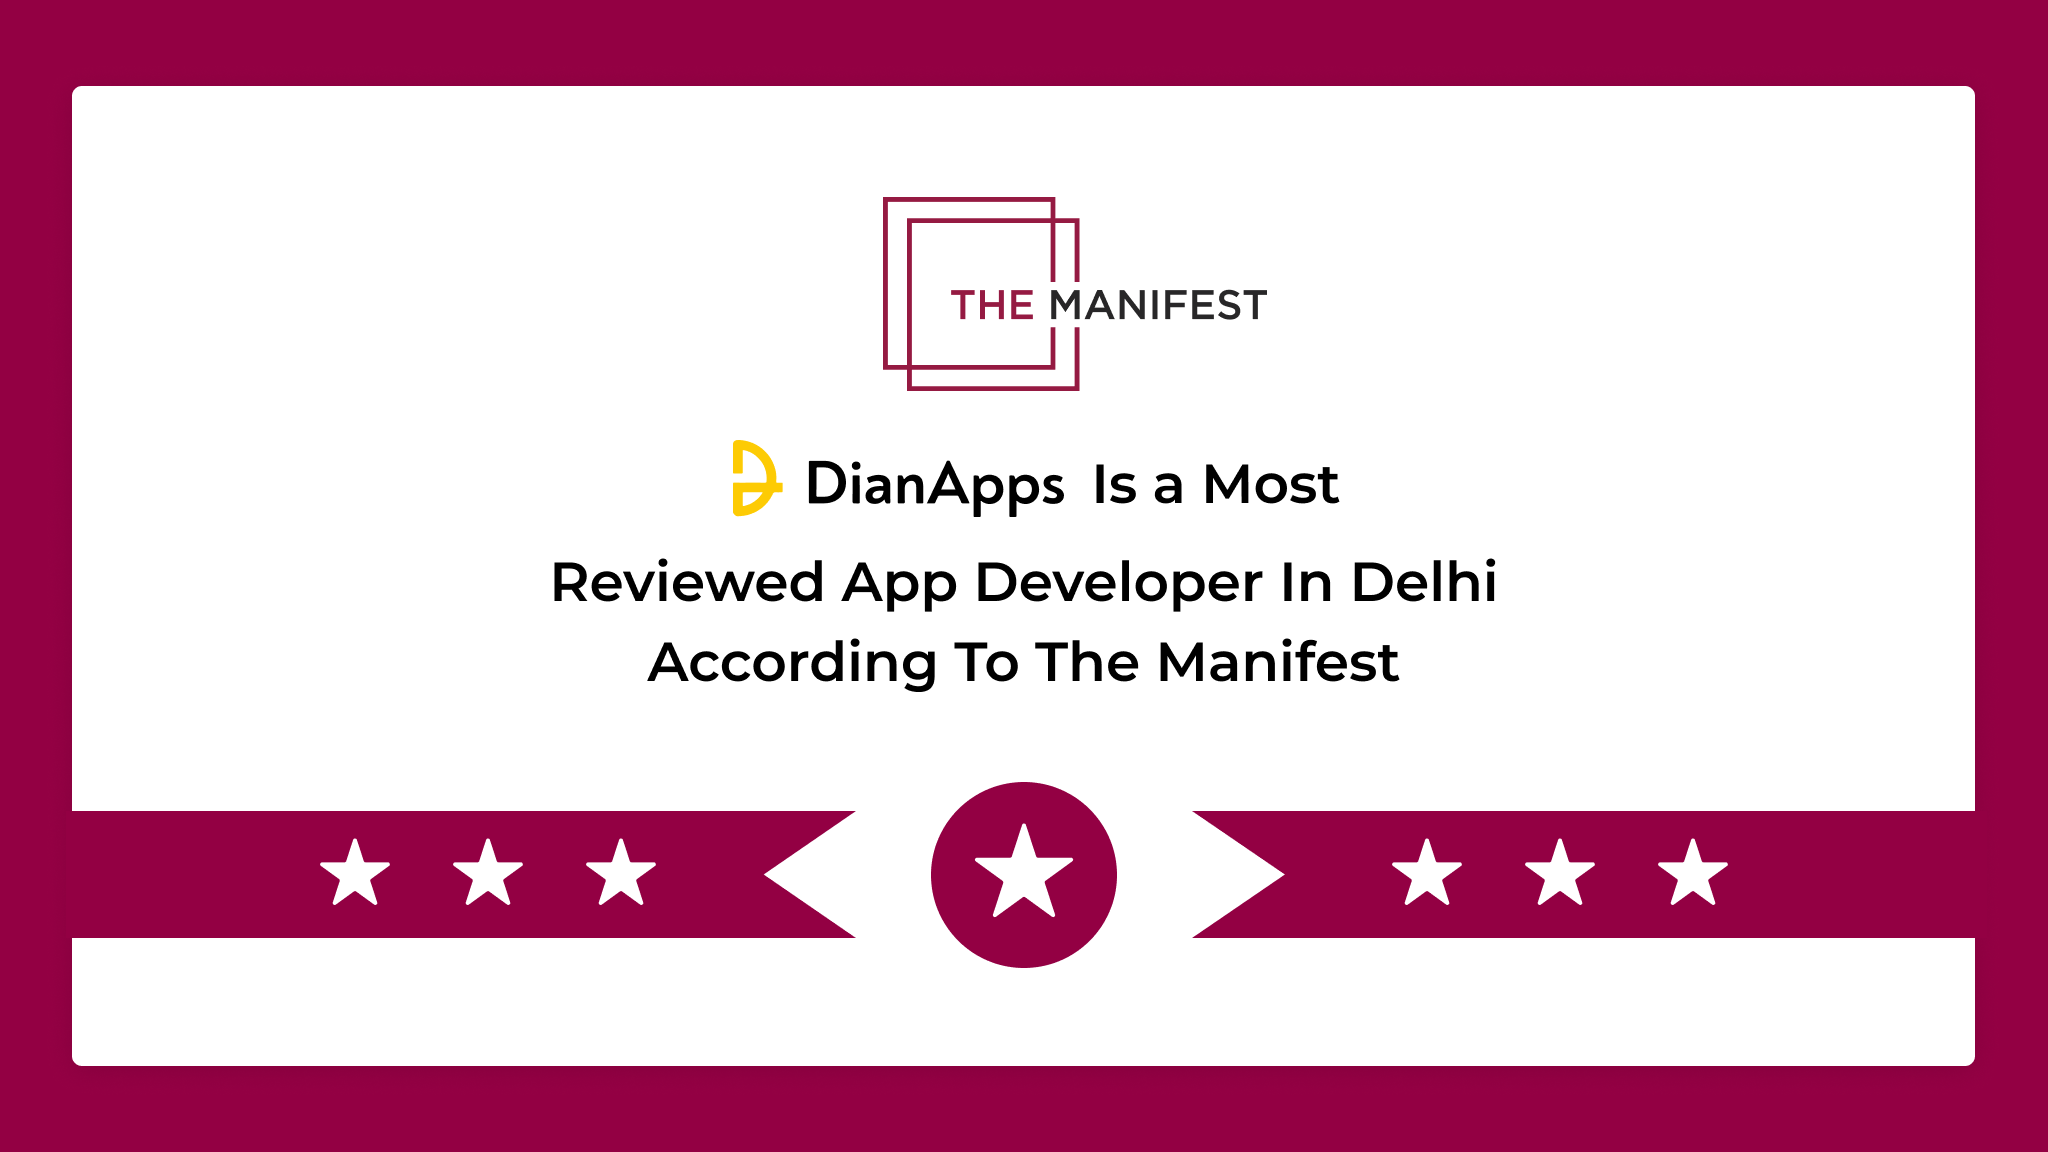 DianApps is a Most Reviewed App Developer in Delhi According to The Manifest